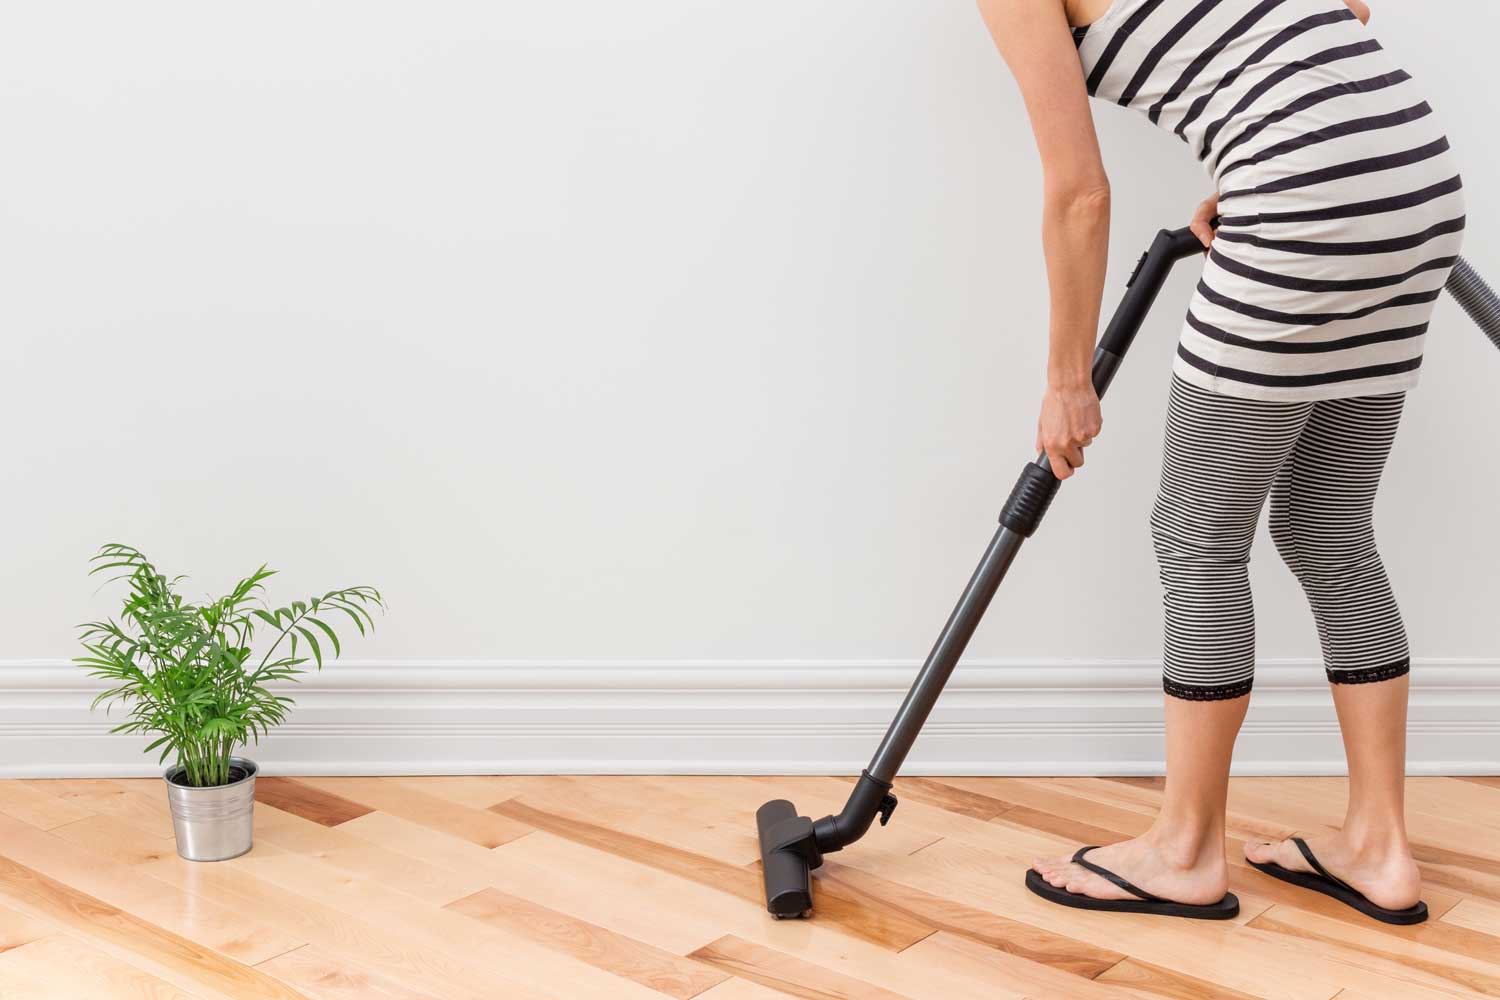 Regulary vacuum or sweep floors to remove dirt and keep your home floors looking amazing - tips from Footprints Floors in Jacksonville.